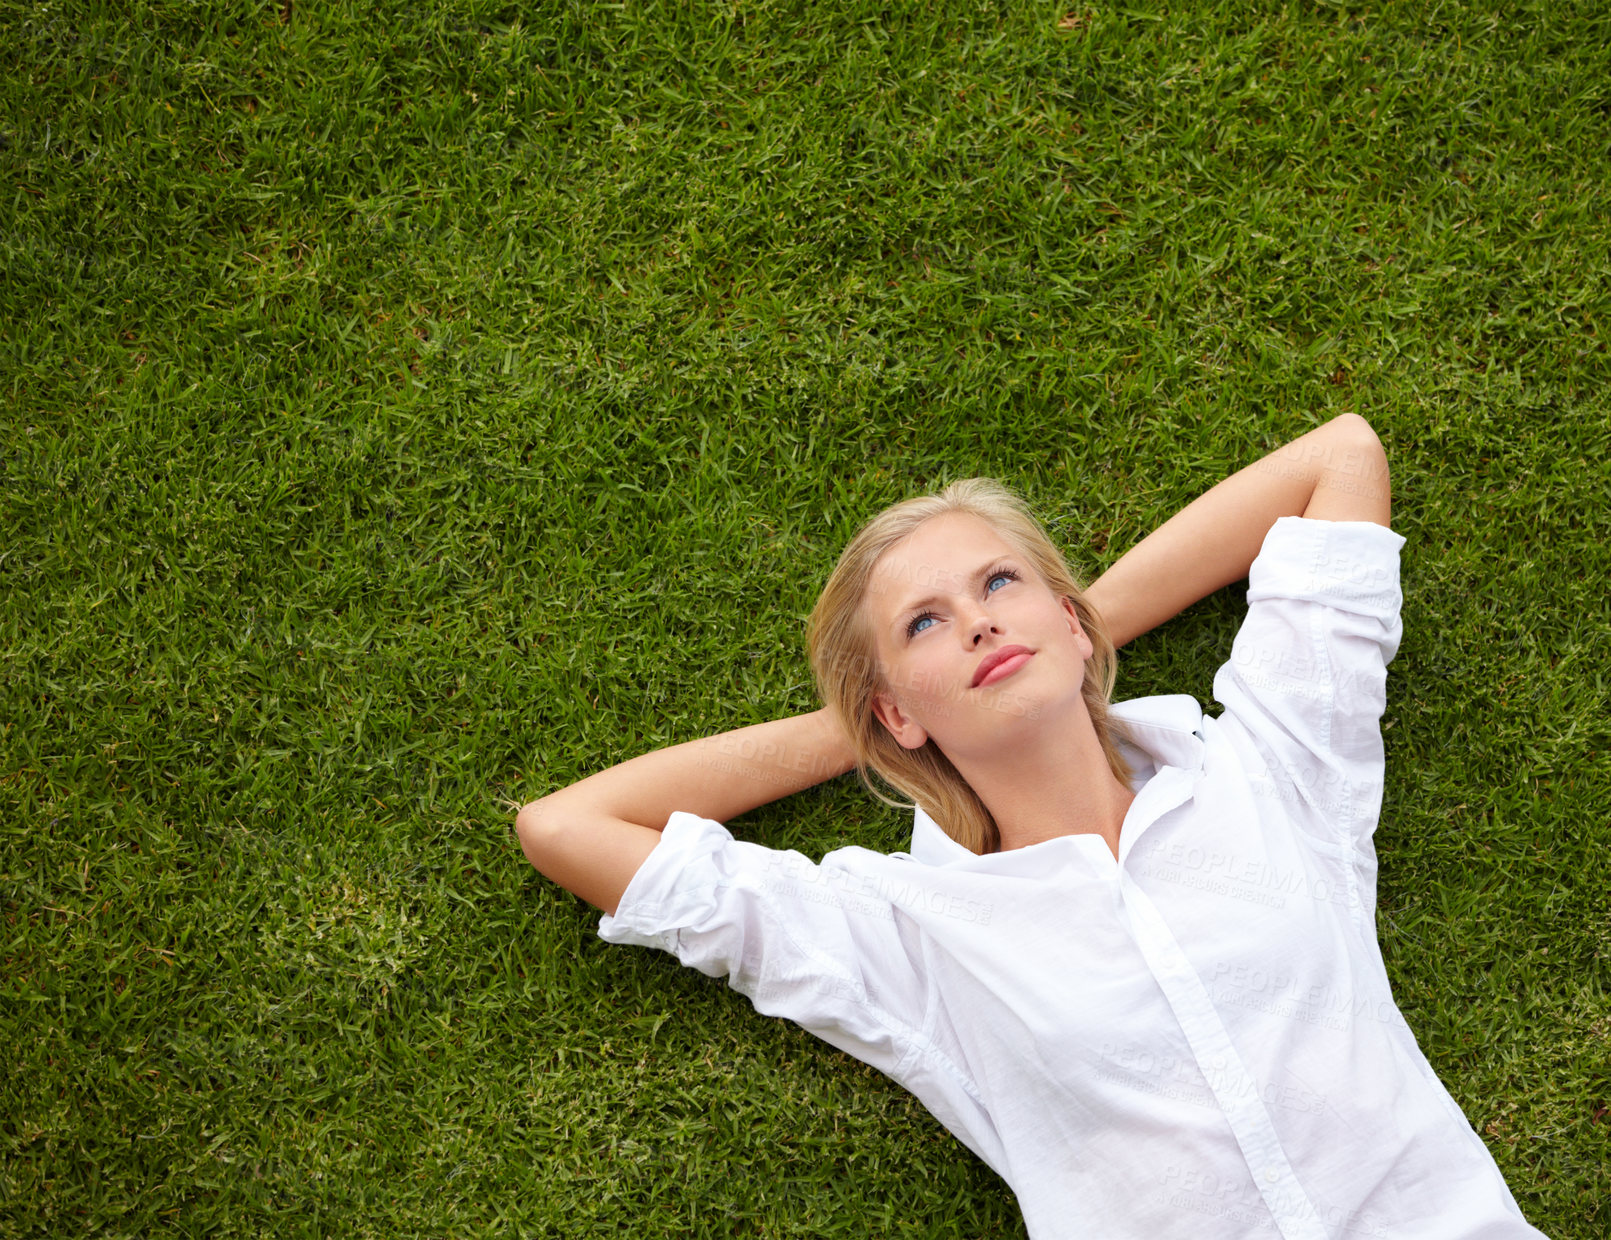 Buy stock photo High angle shot of an attractive young woman relaxing on a grassy field and looking up at the sky